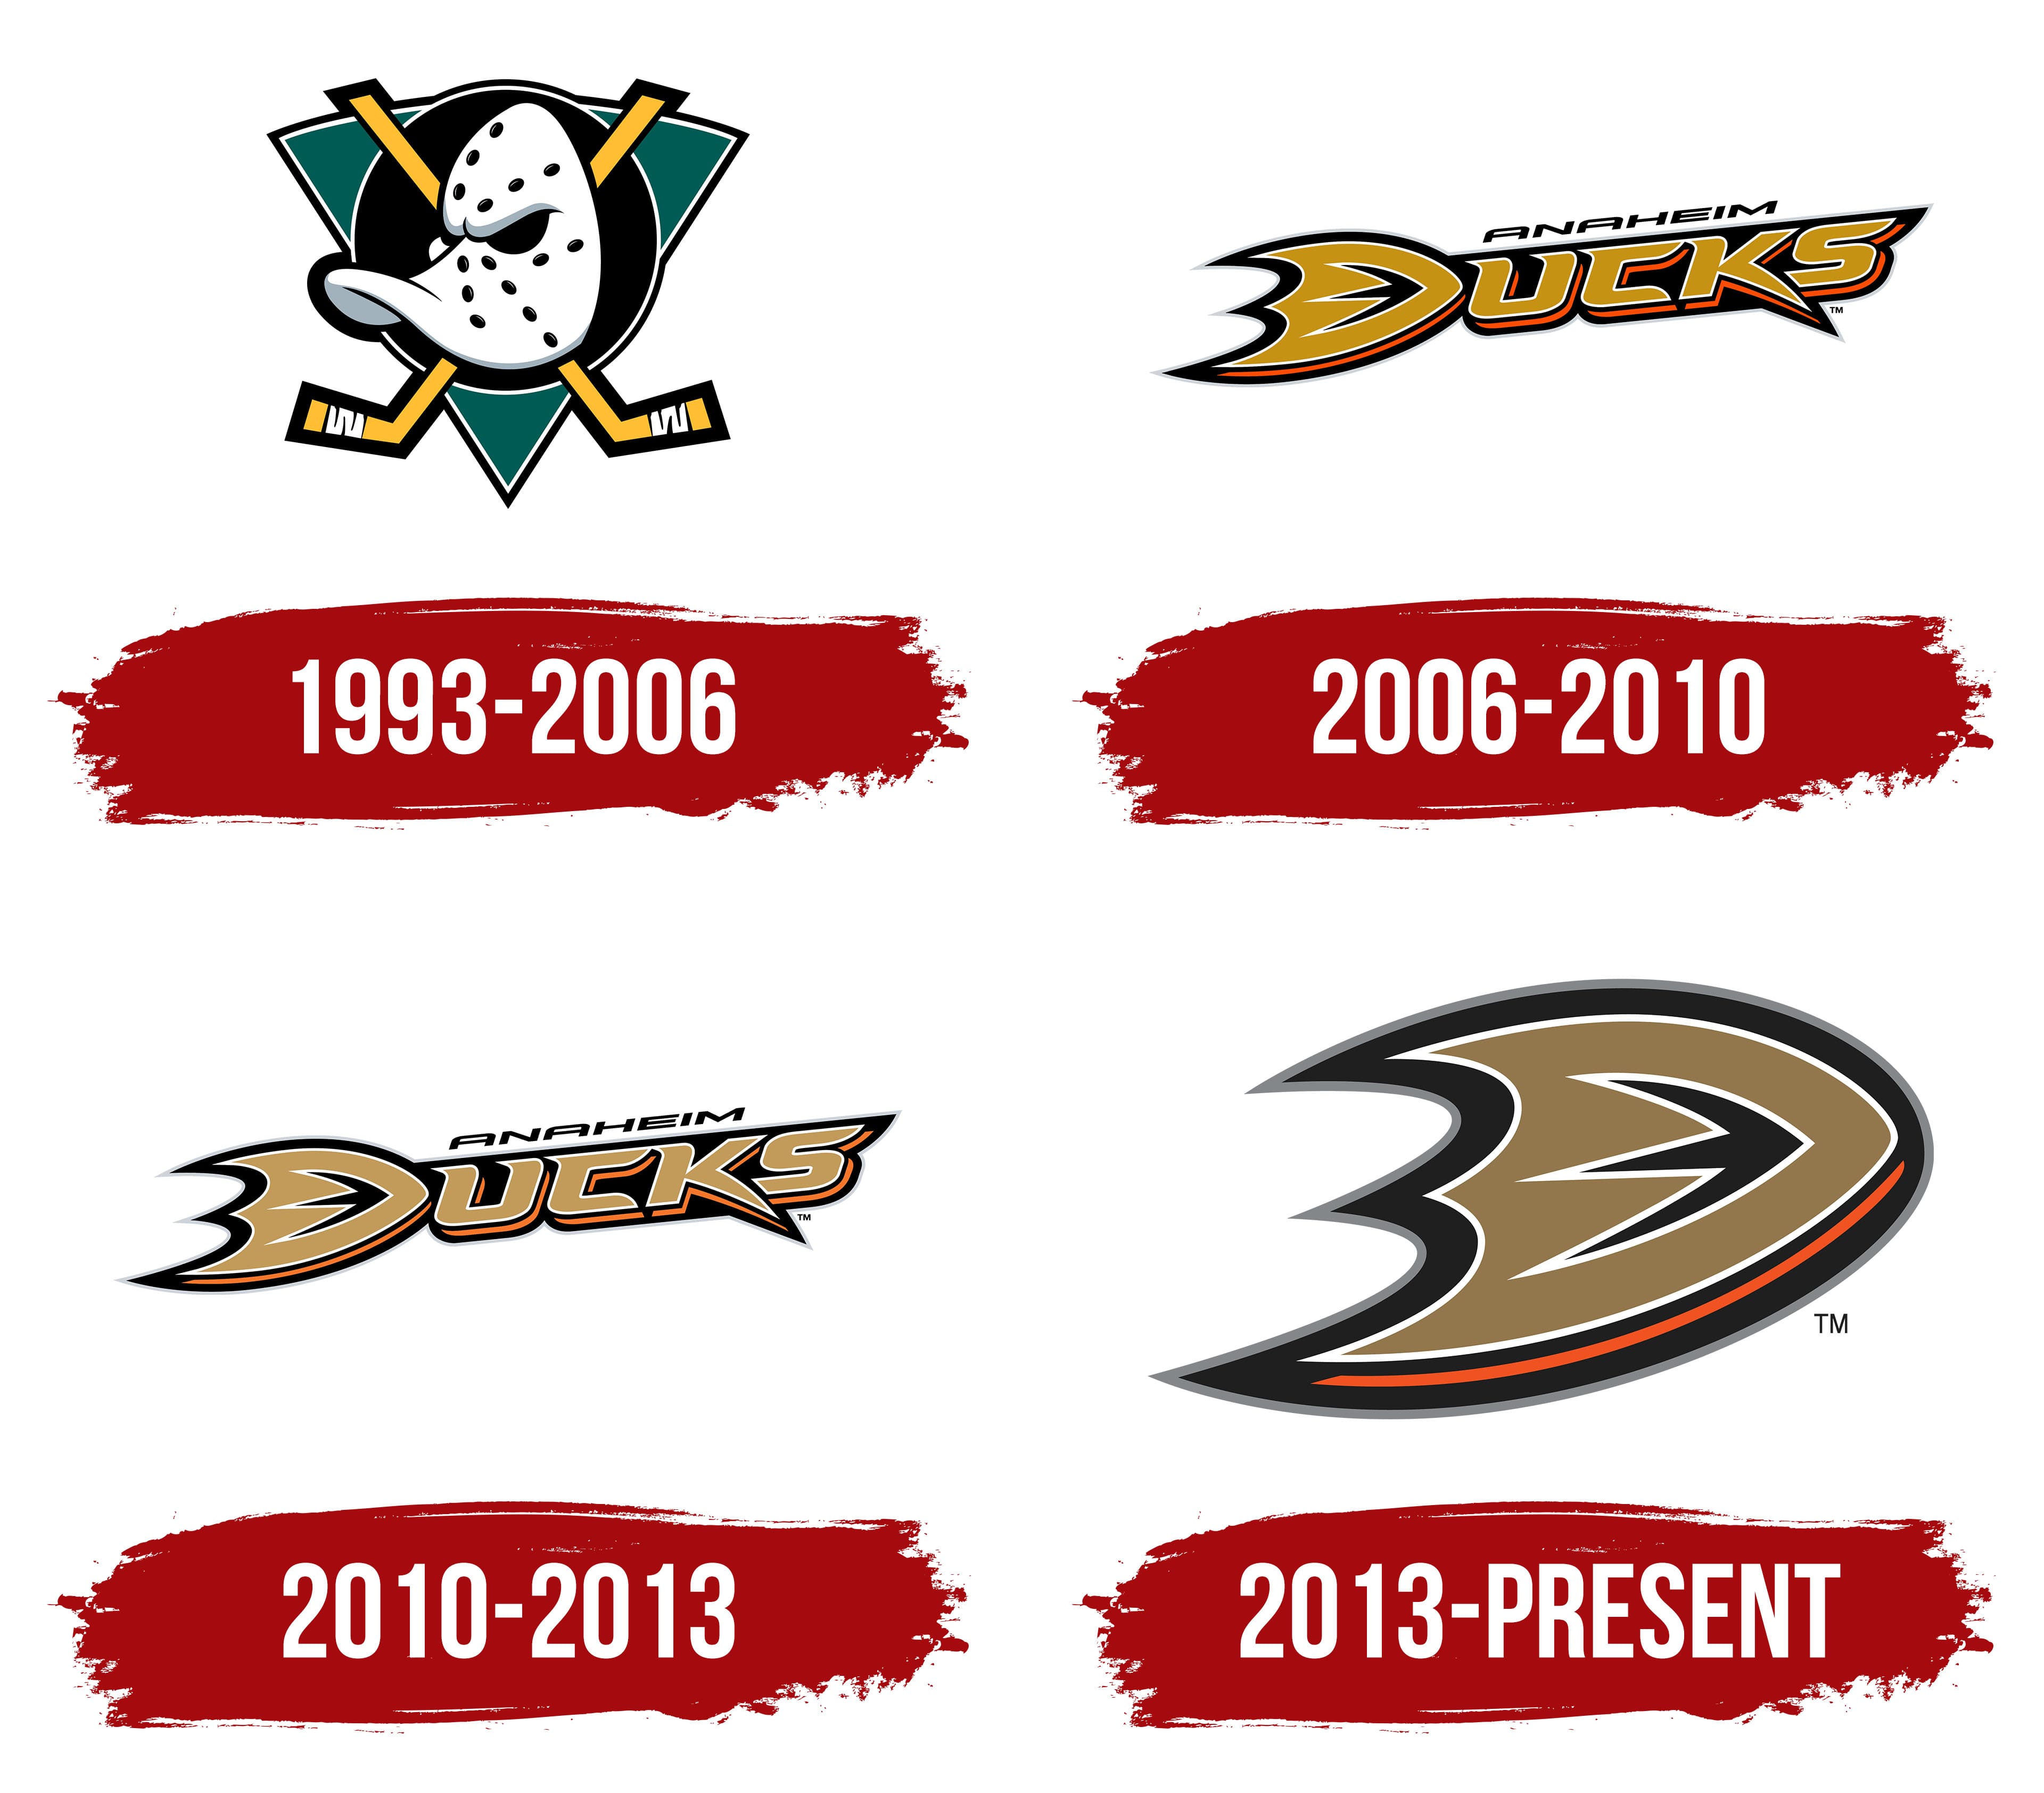 Anaheim Ducks Logo And Symbol, Meaning, History, PNG, Brand vlr.eng.br